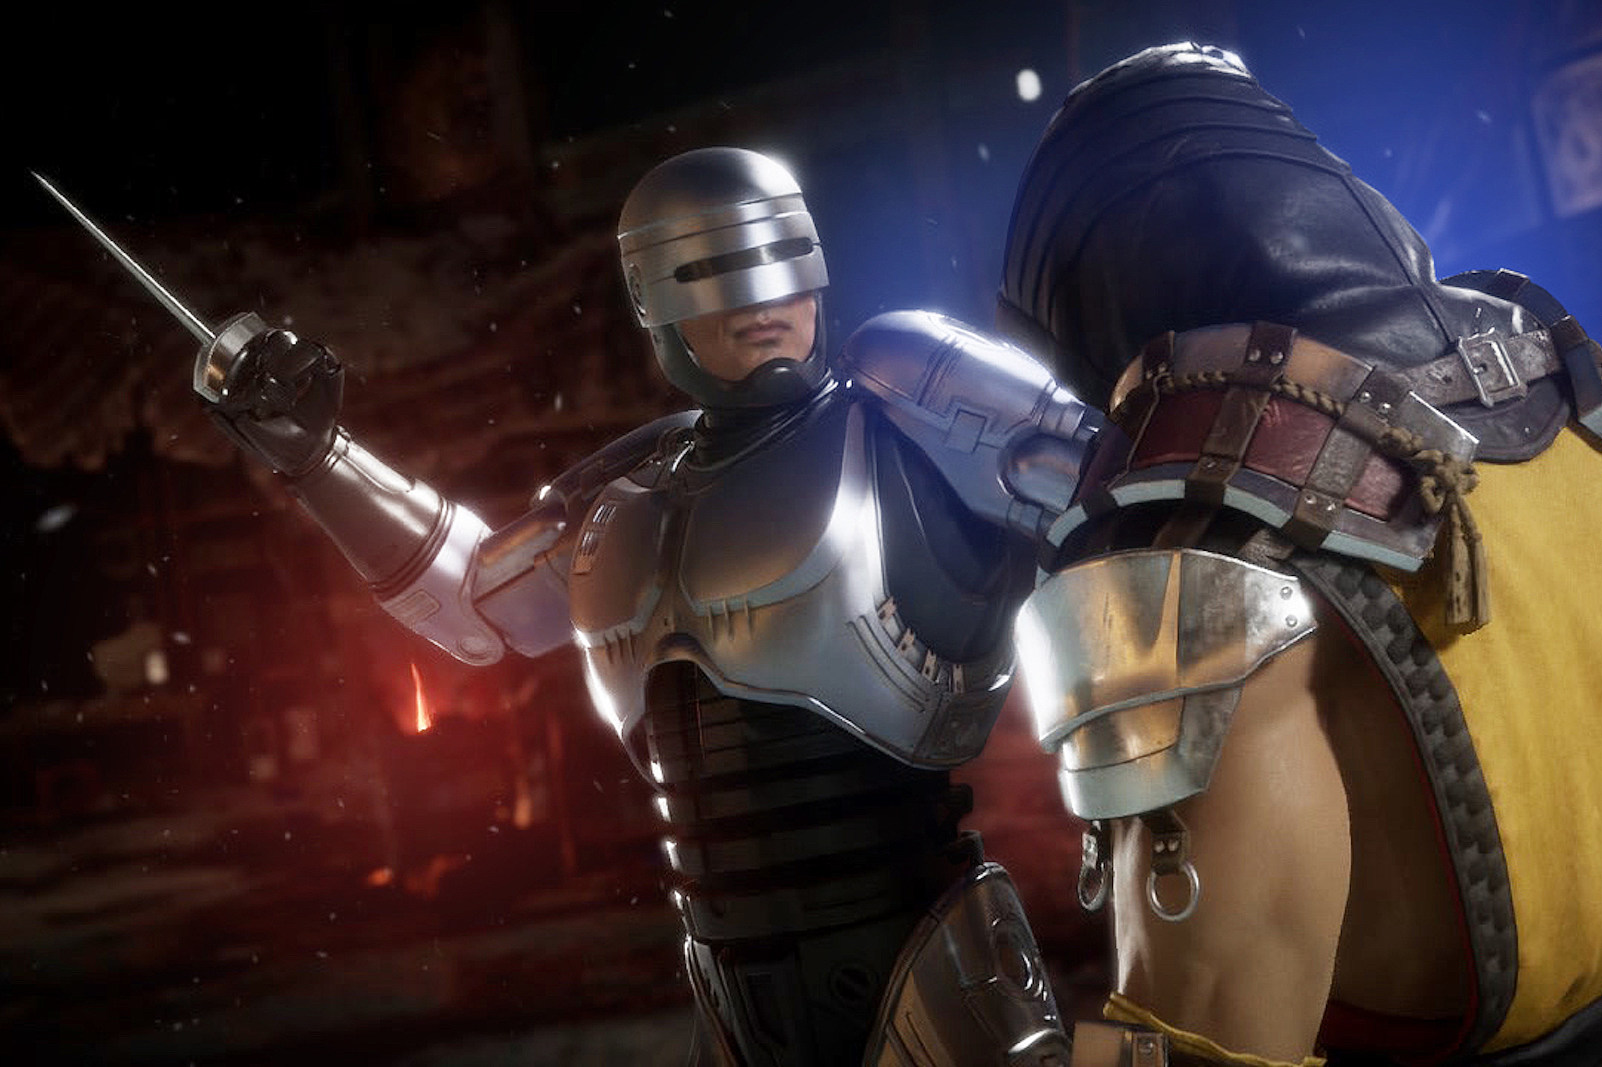 Who should make the cut if there's a second Mortal Kombat 11 Kombat Pack?  Here are some of the most requested DLC characters